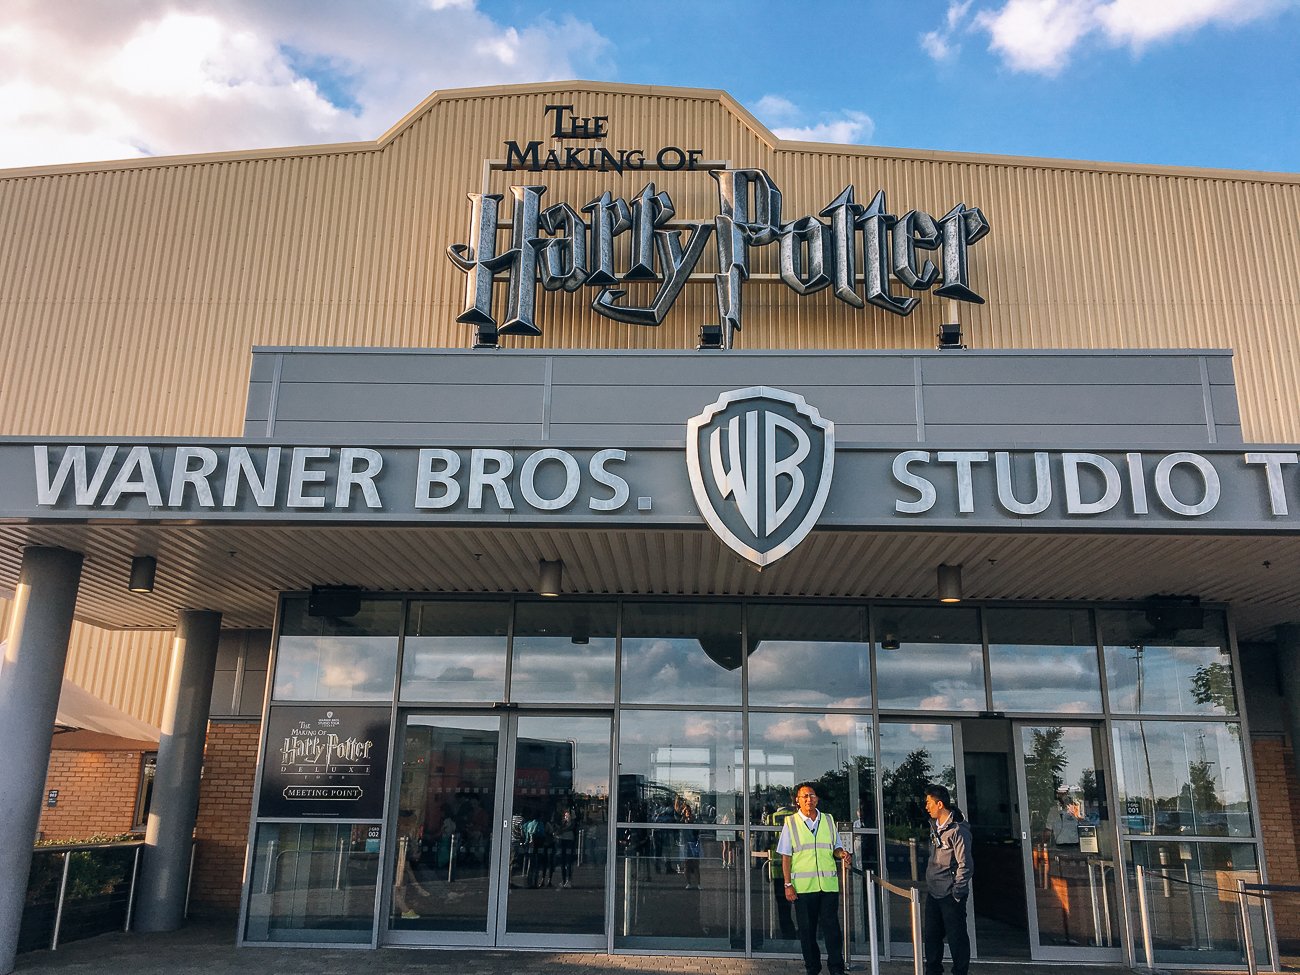 The outside of the Harry Potter Warner Bros. Studio Tour